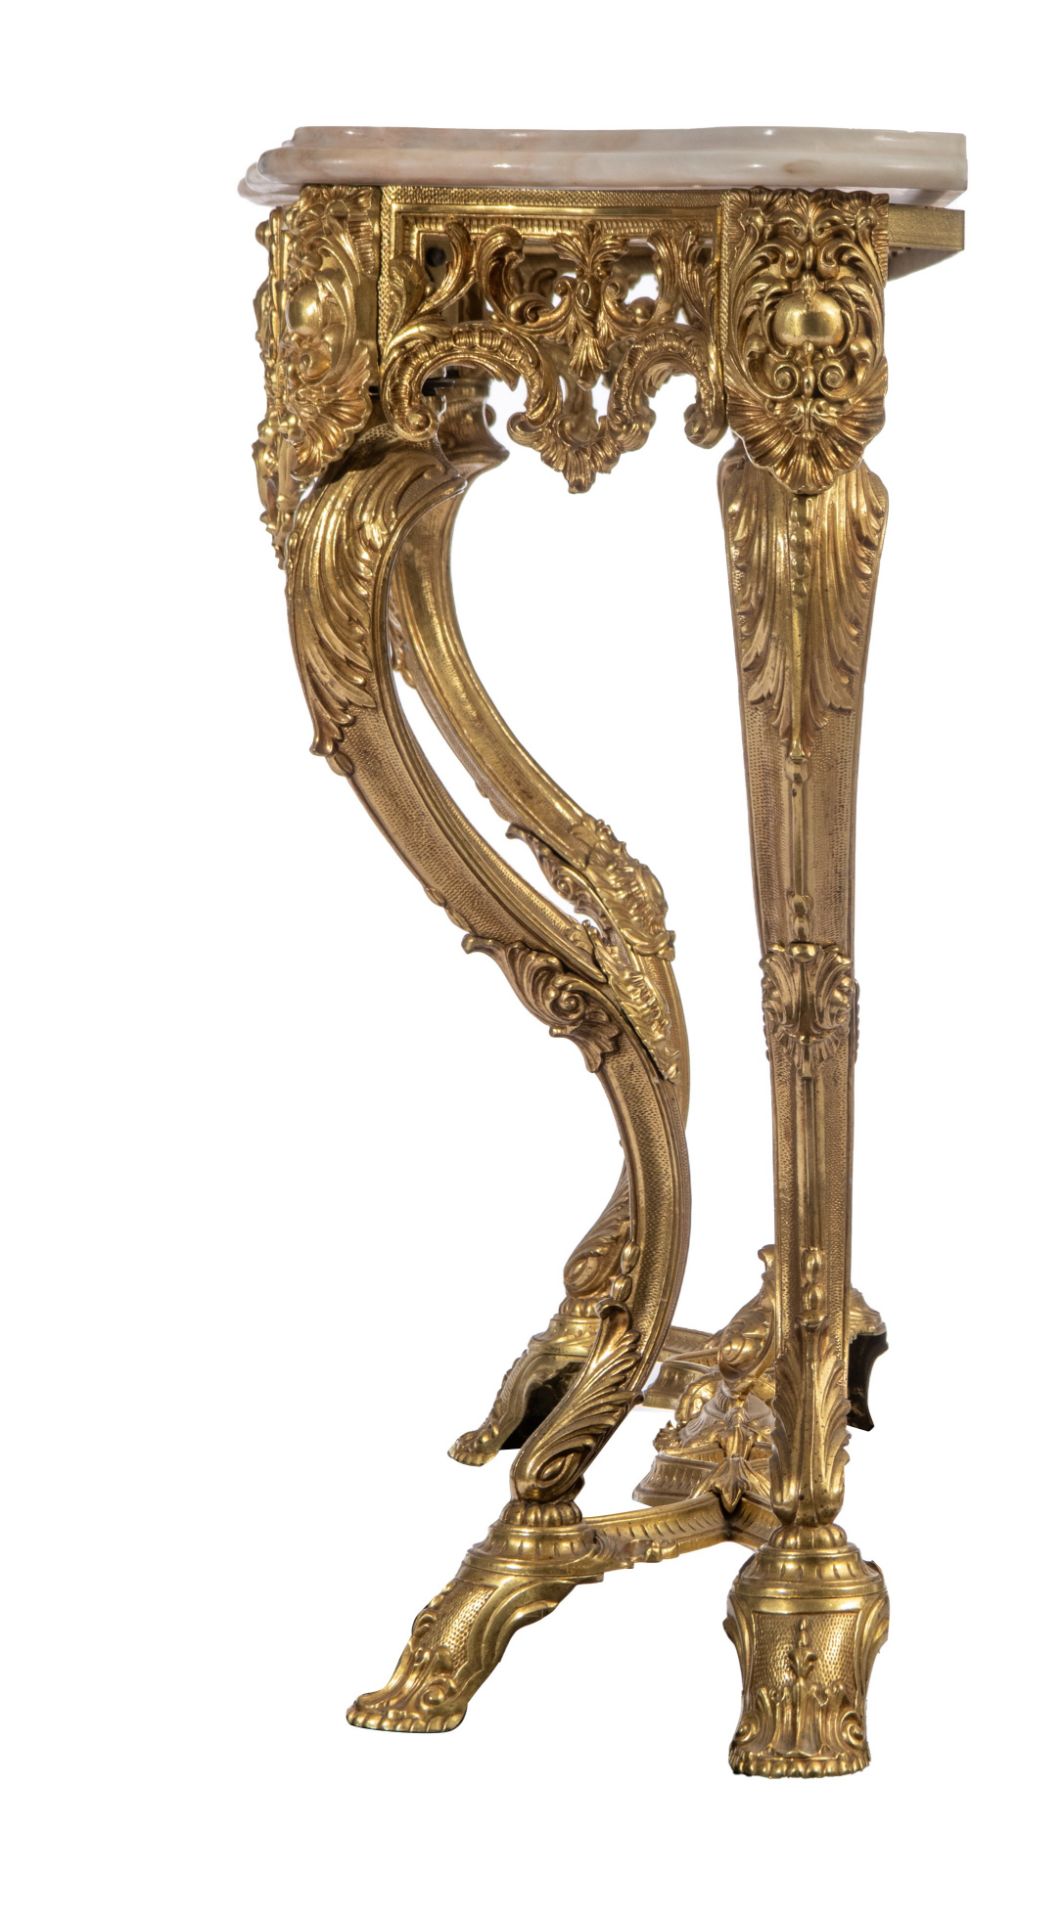 A large Rococo style gilt metal console table and mirror, H 125 - W 110 cm (the mirror) - H 85 - W 1 - Image 4 of 12